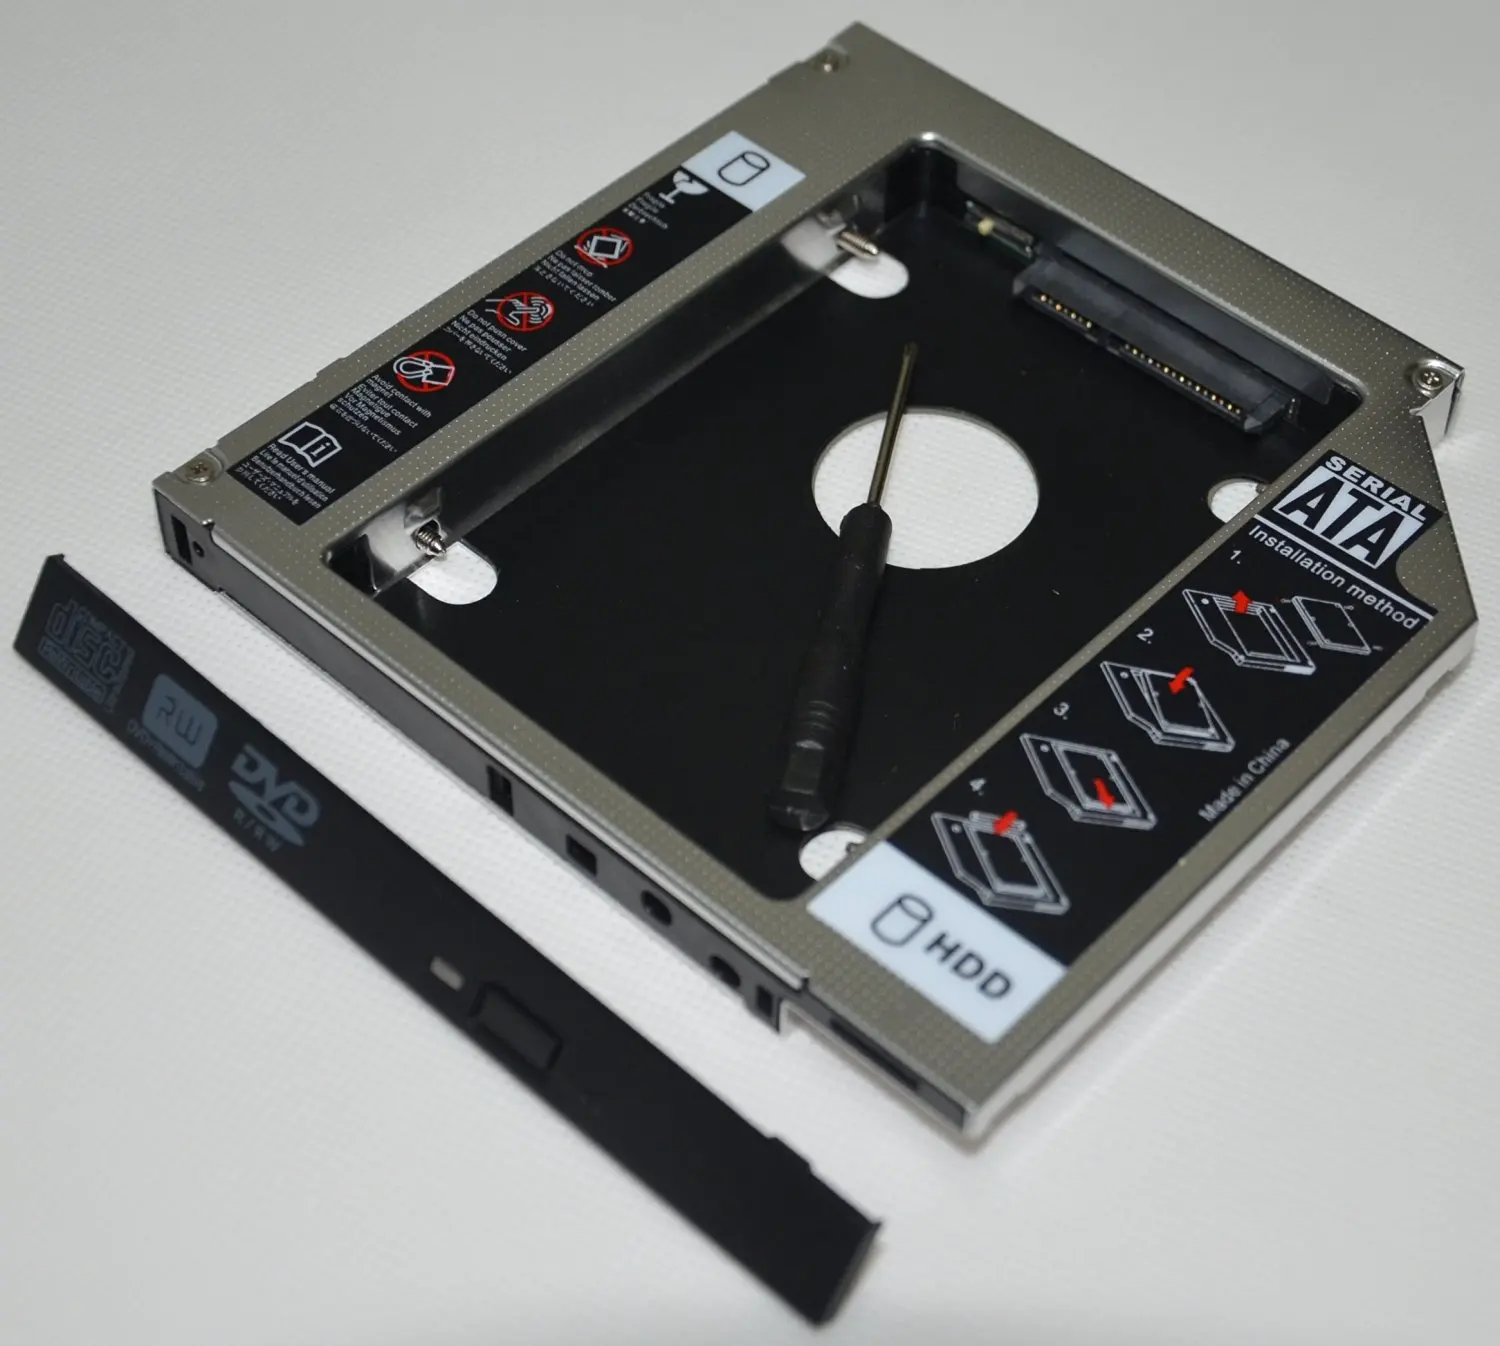 toshiba r830 disk drive solid state